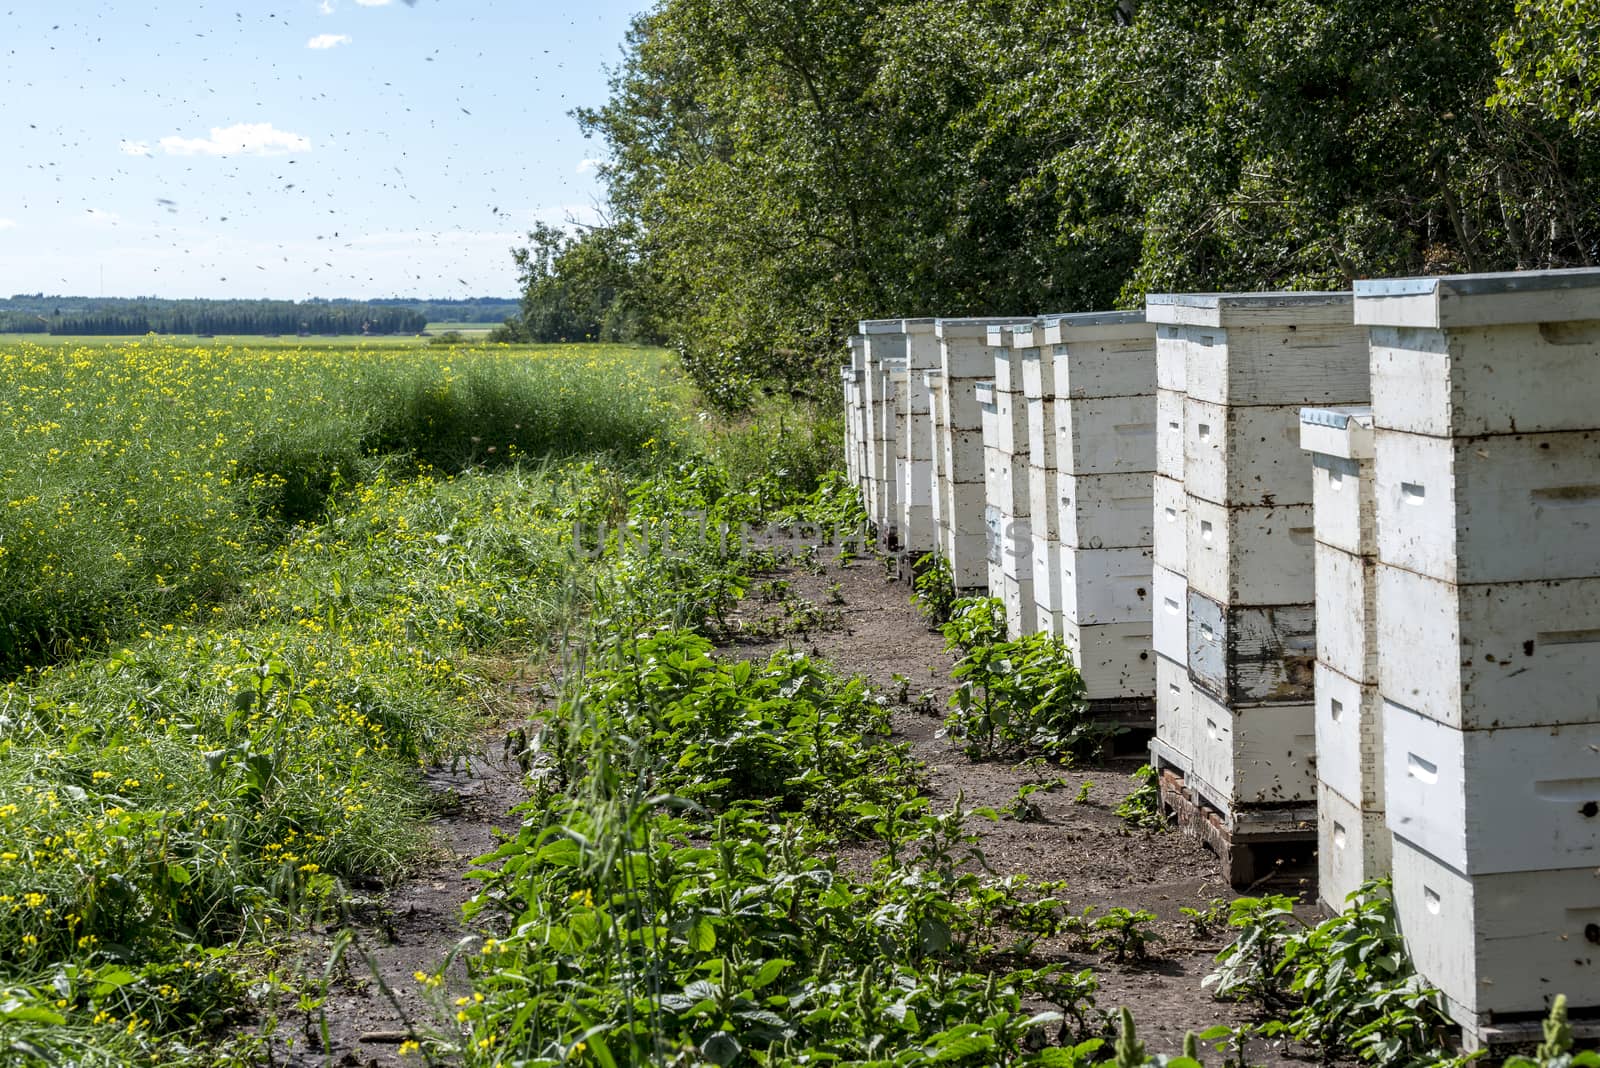 Stacks of bee hives on the edge of a farm field